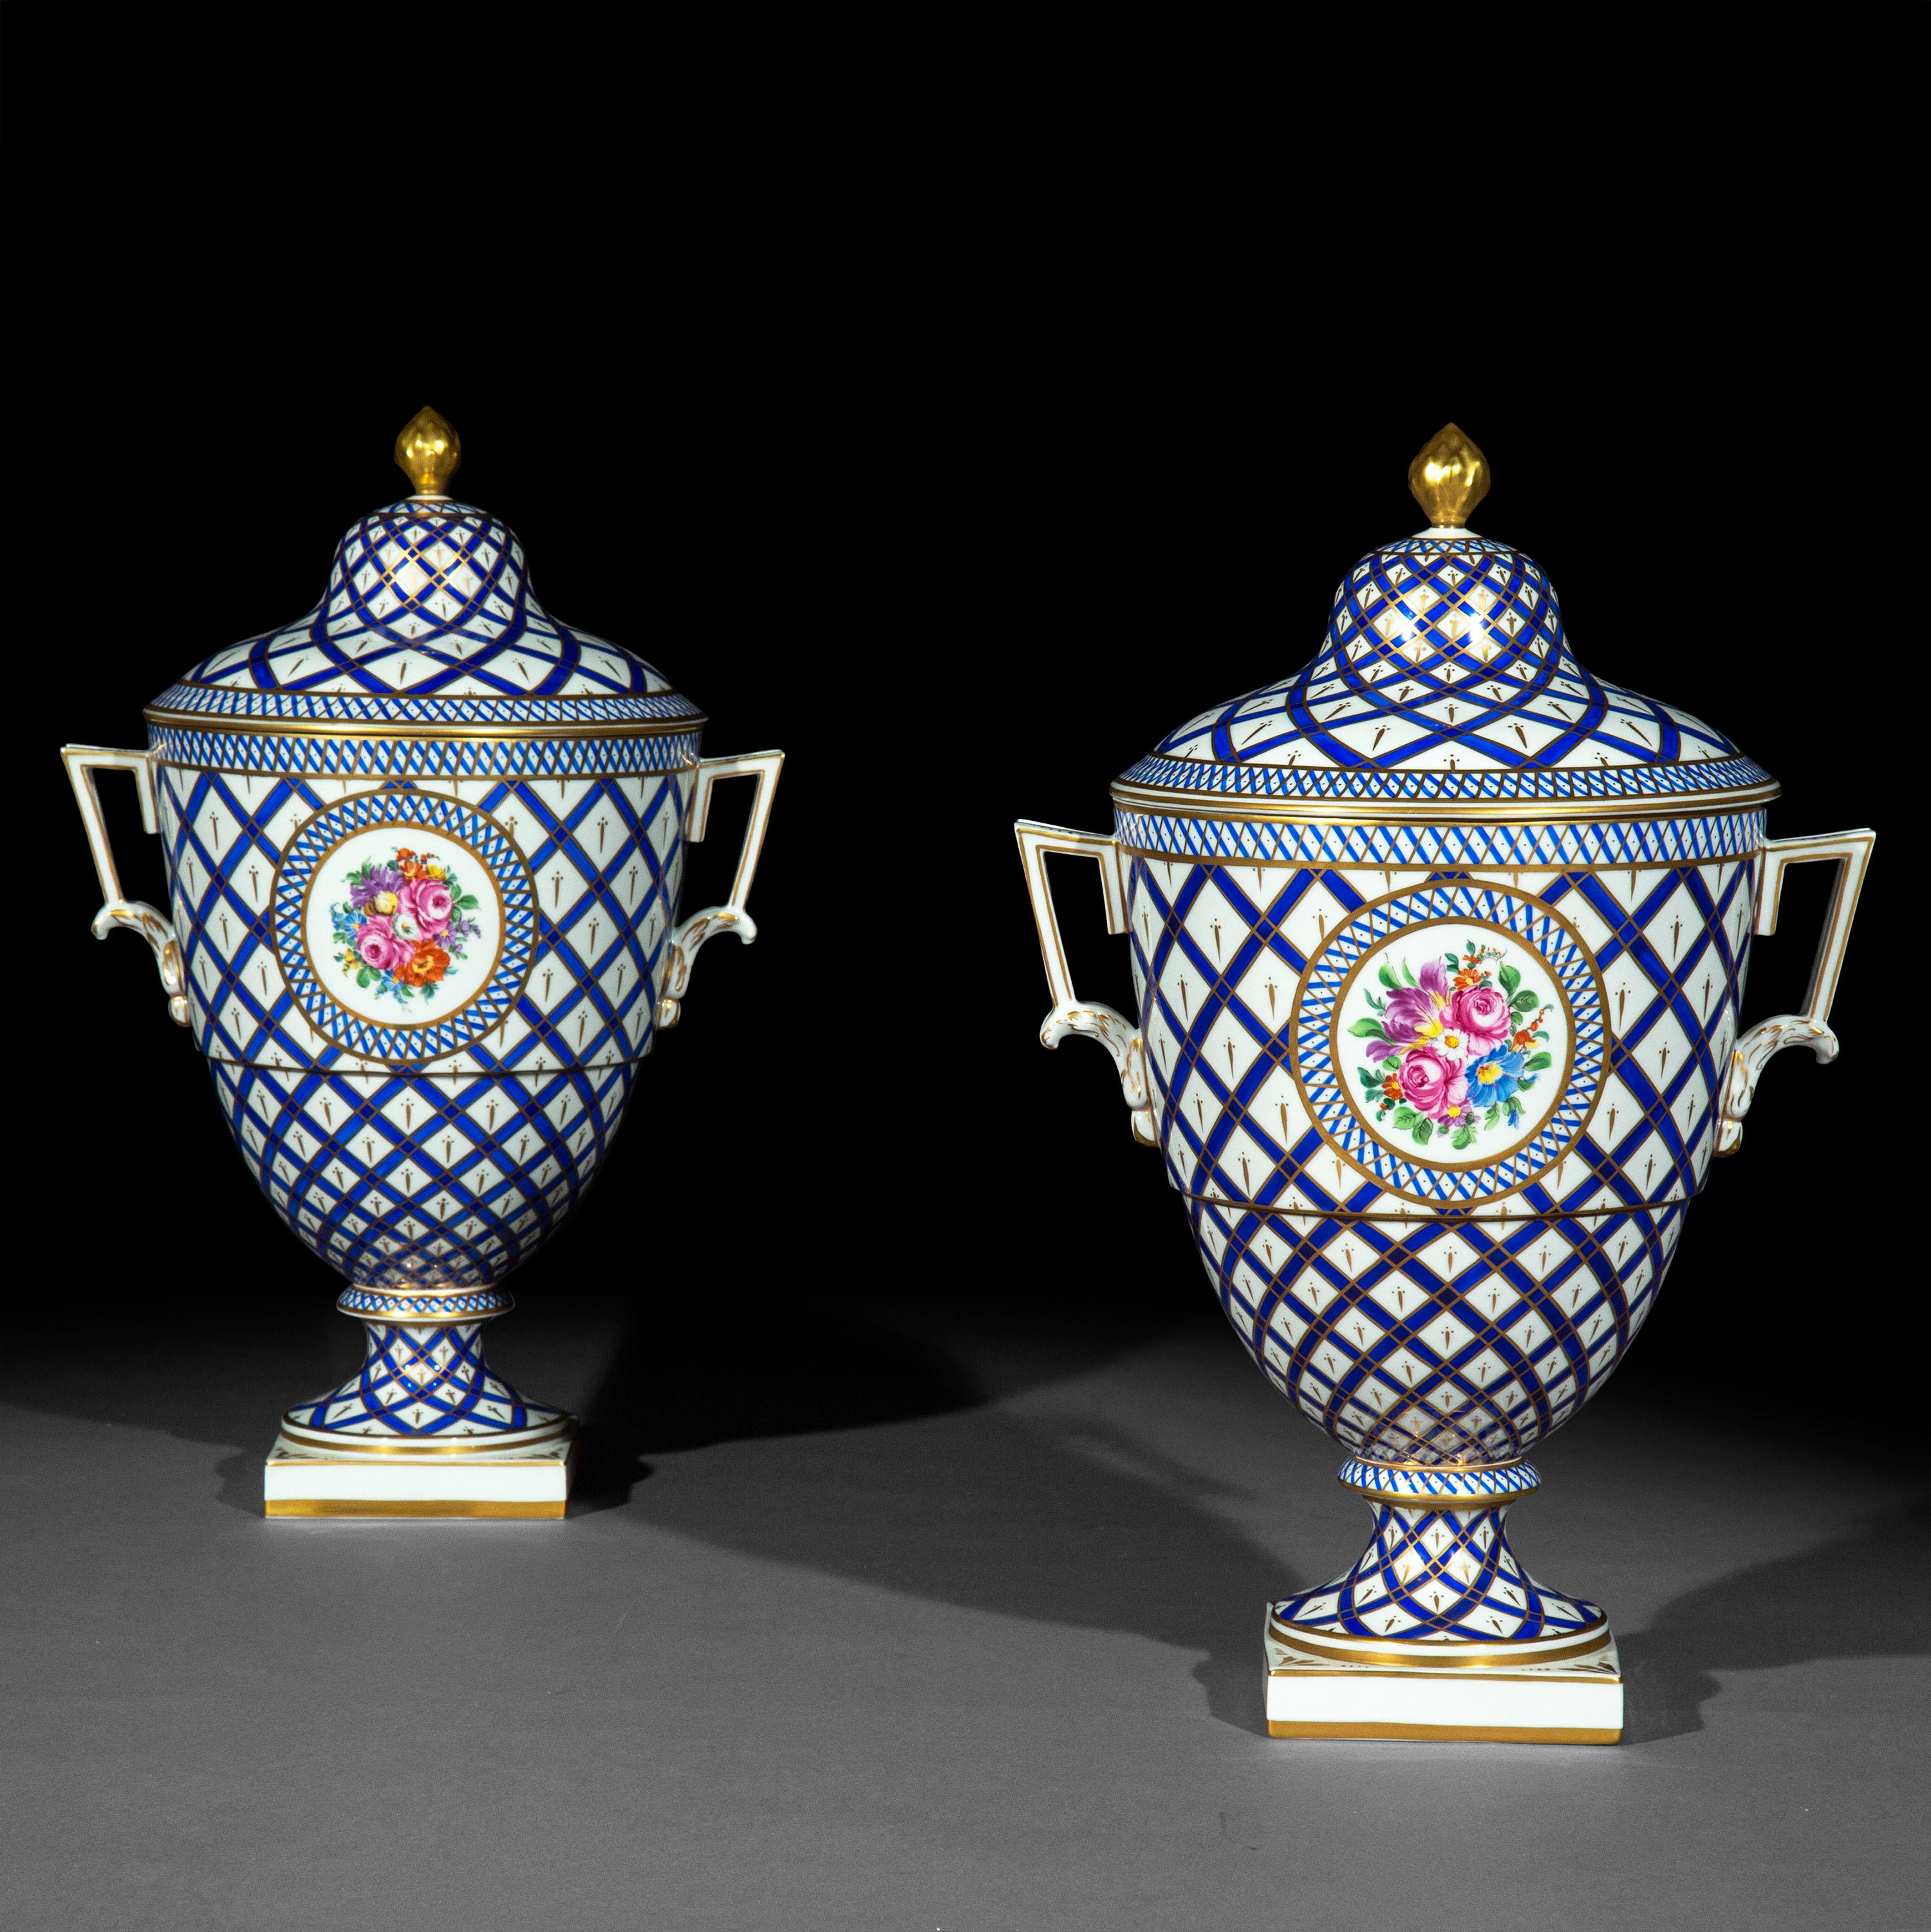 A superbly decorative pair of neoclassical lidded porcelain vases, exquisitely hand-painted in blue and white colours and gilded throughout.

Germany, early 20th century

We love the succulent colours and the intricacy of the miniature paintings.
   